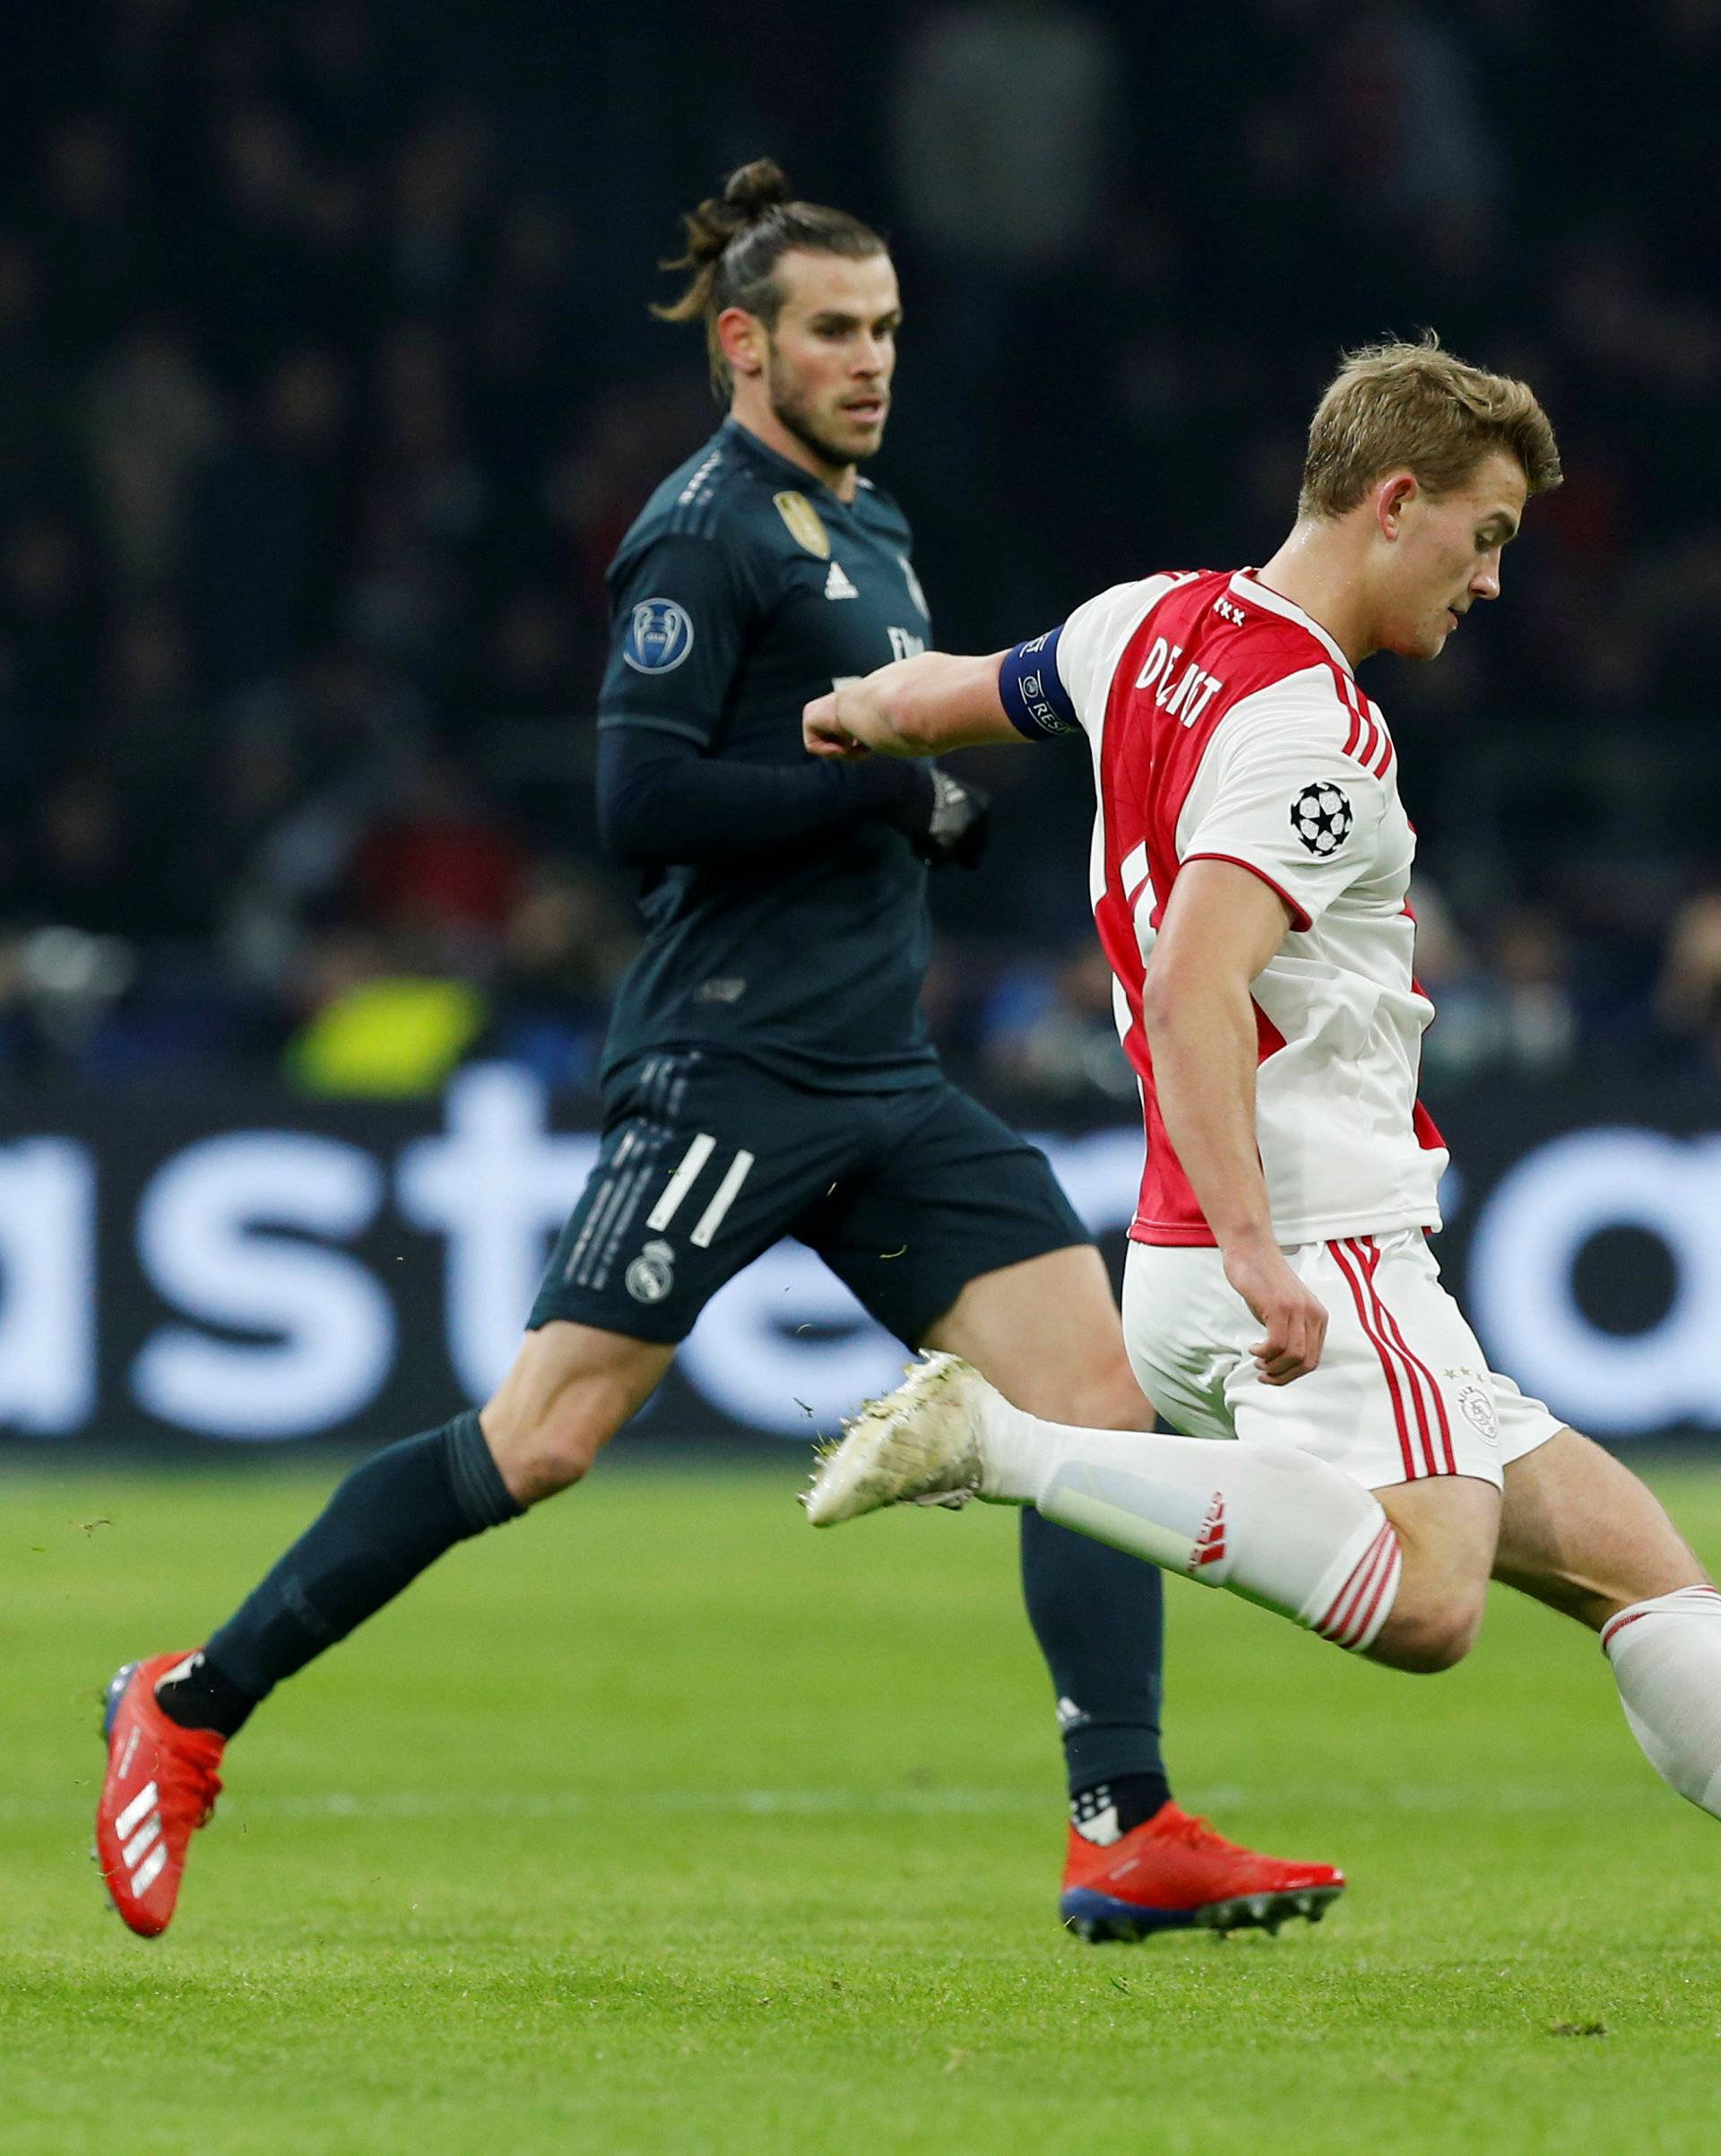 Champions League Round of 16 First Leg - Ajax Amsterdam v Real Madrid